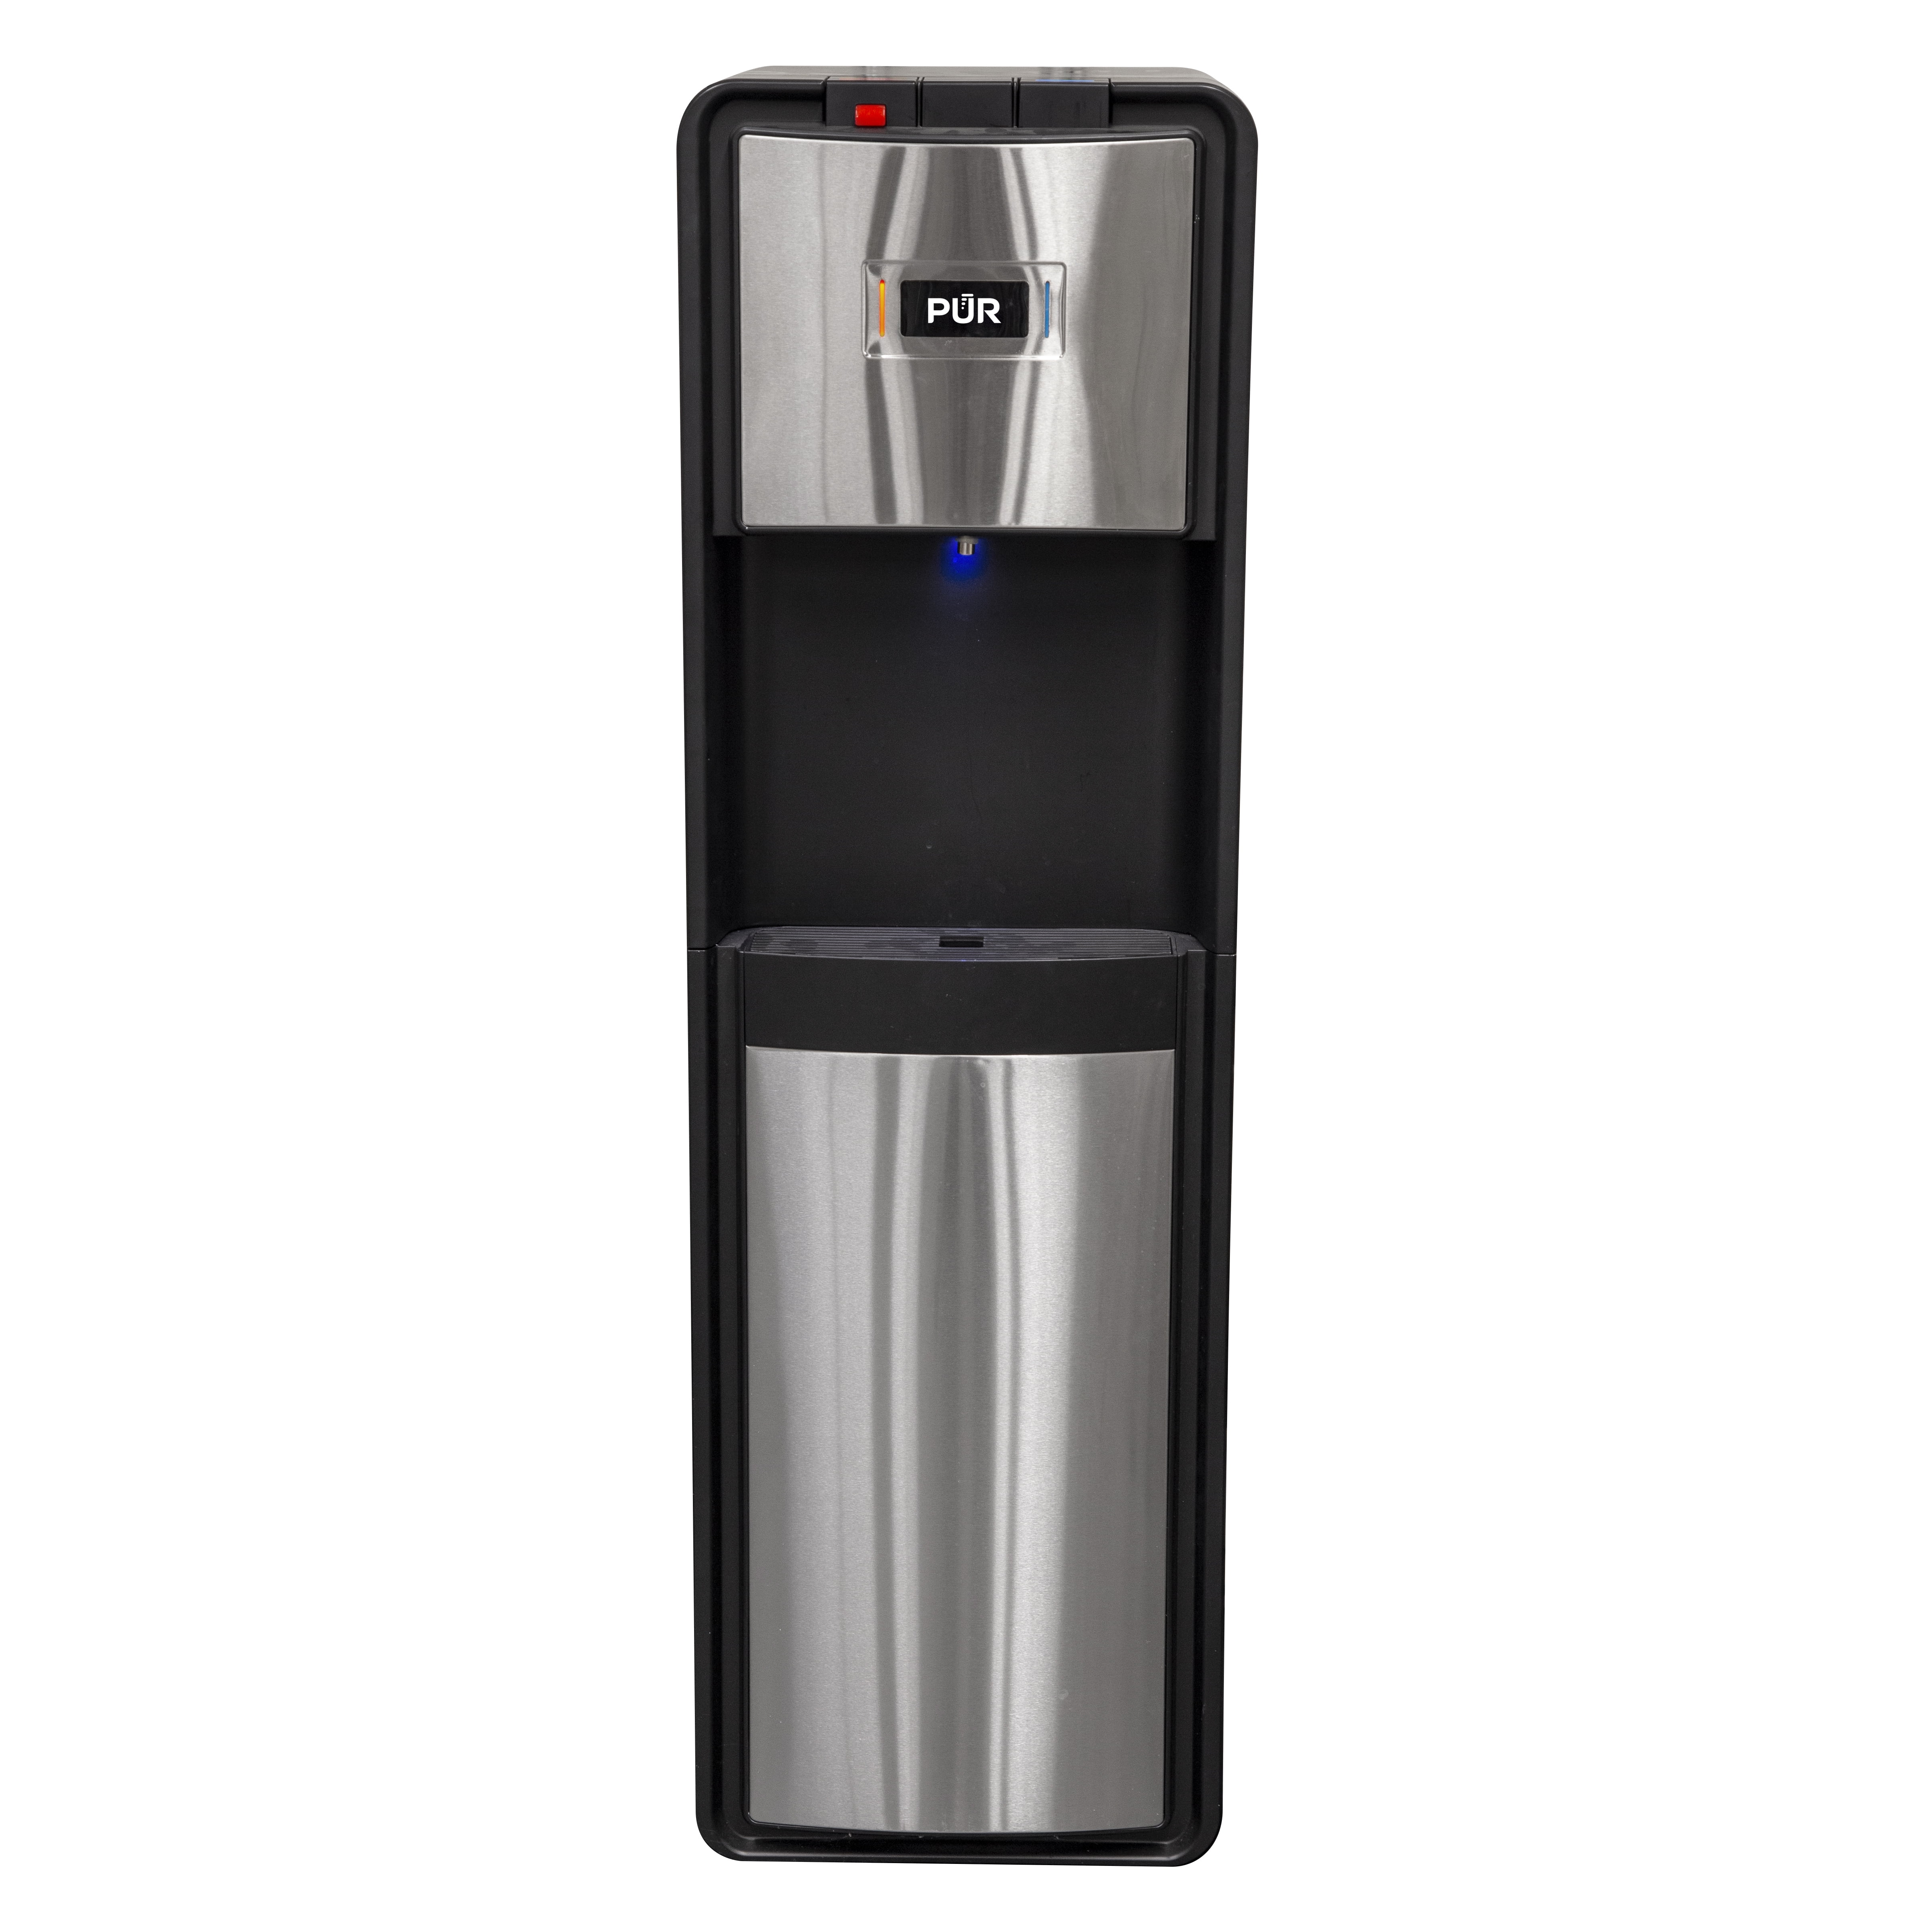 H2O-850 Countertop Water Dispenser - Hot, Cold, Room Temp Drinking Water